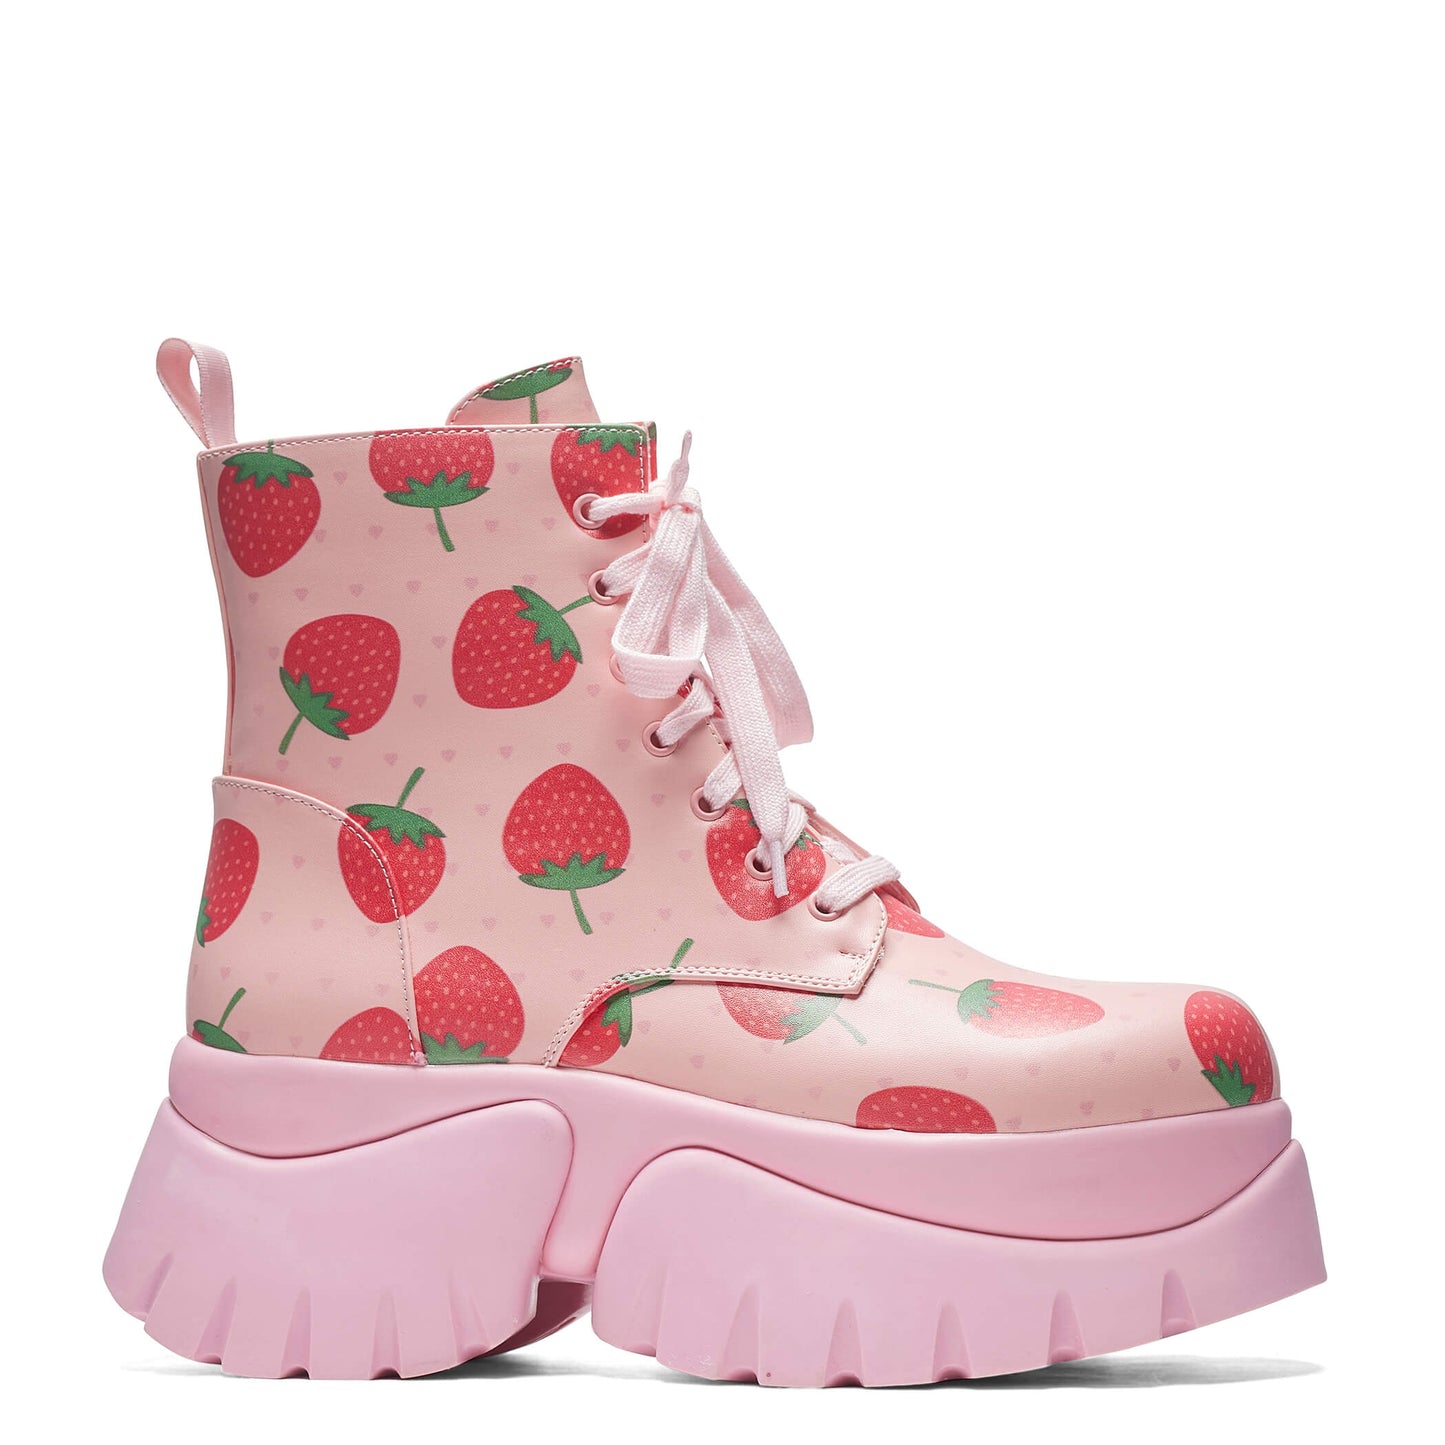 Strawberry Shortcake Pink Vilun Boots - Ankle Boots - KOI Footwear - Pink - Side View